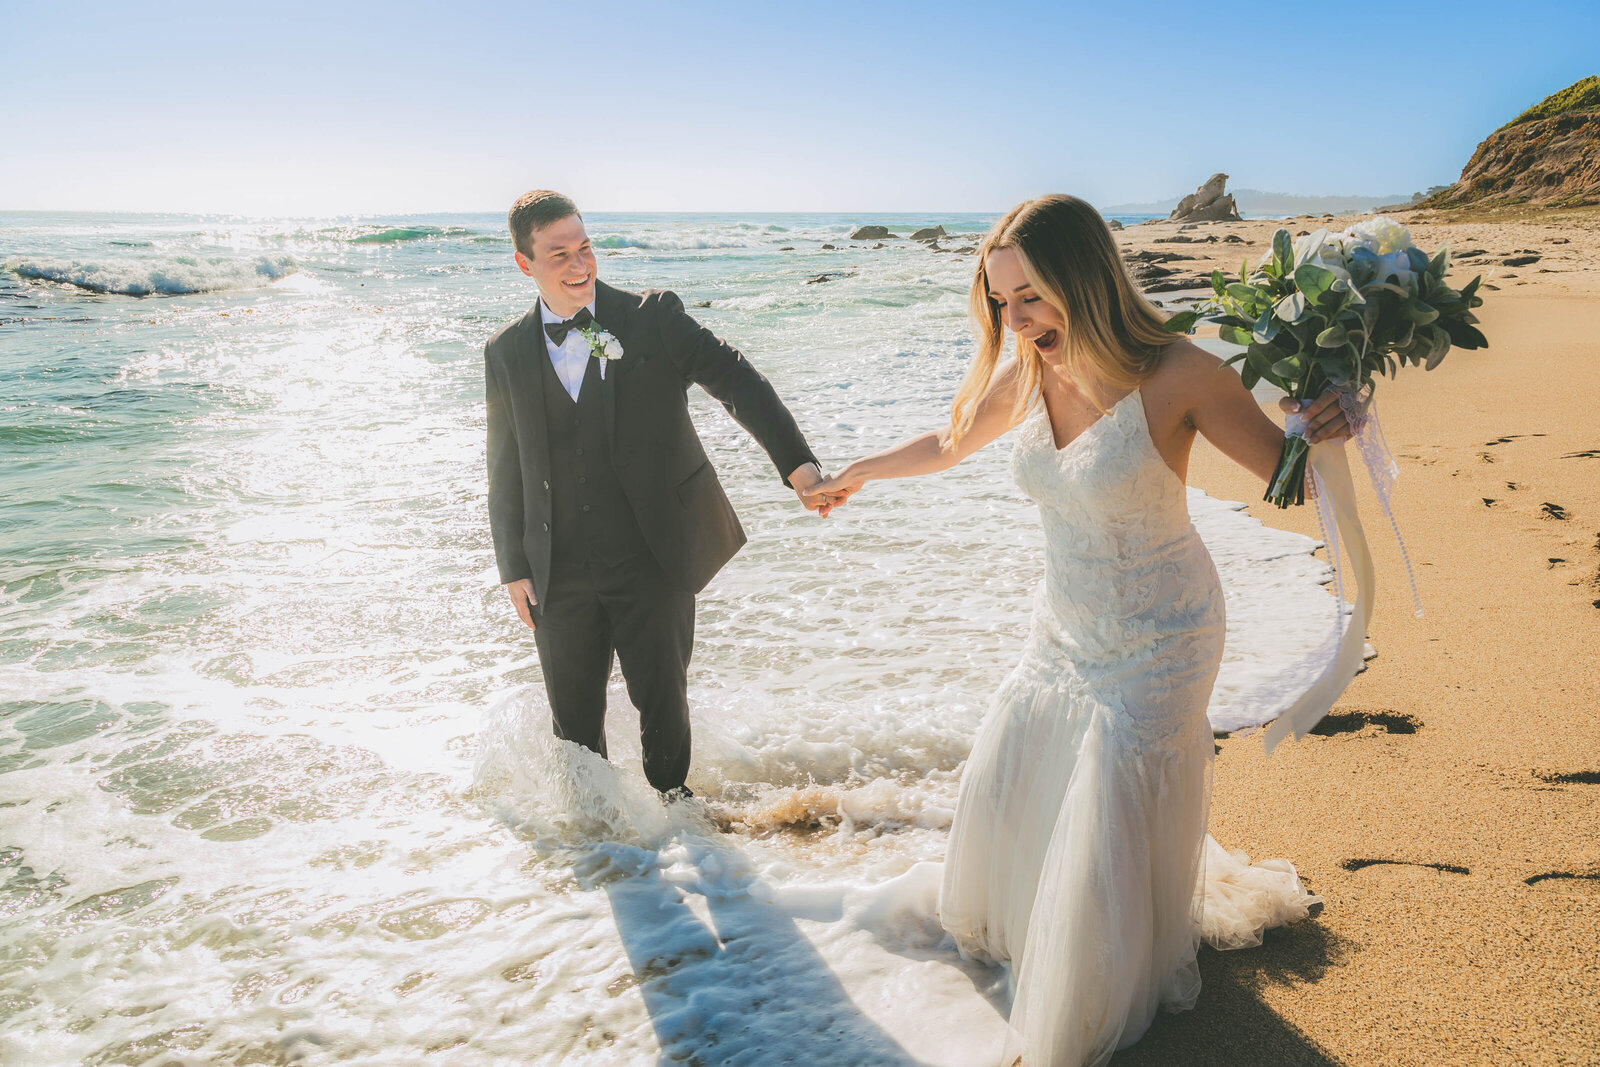 A couple who just got married laugh as they get wet from the waves during their beach wedding.